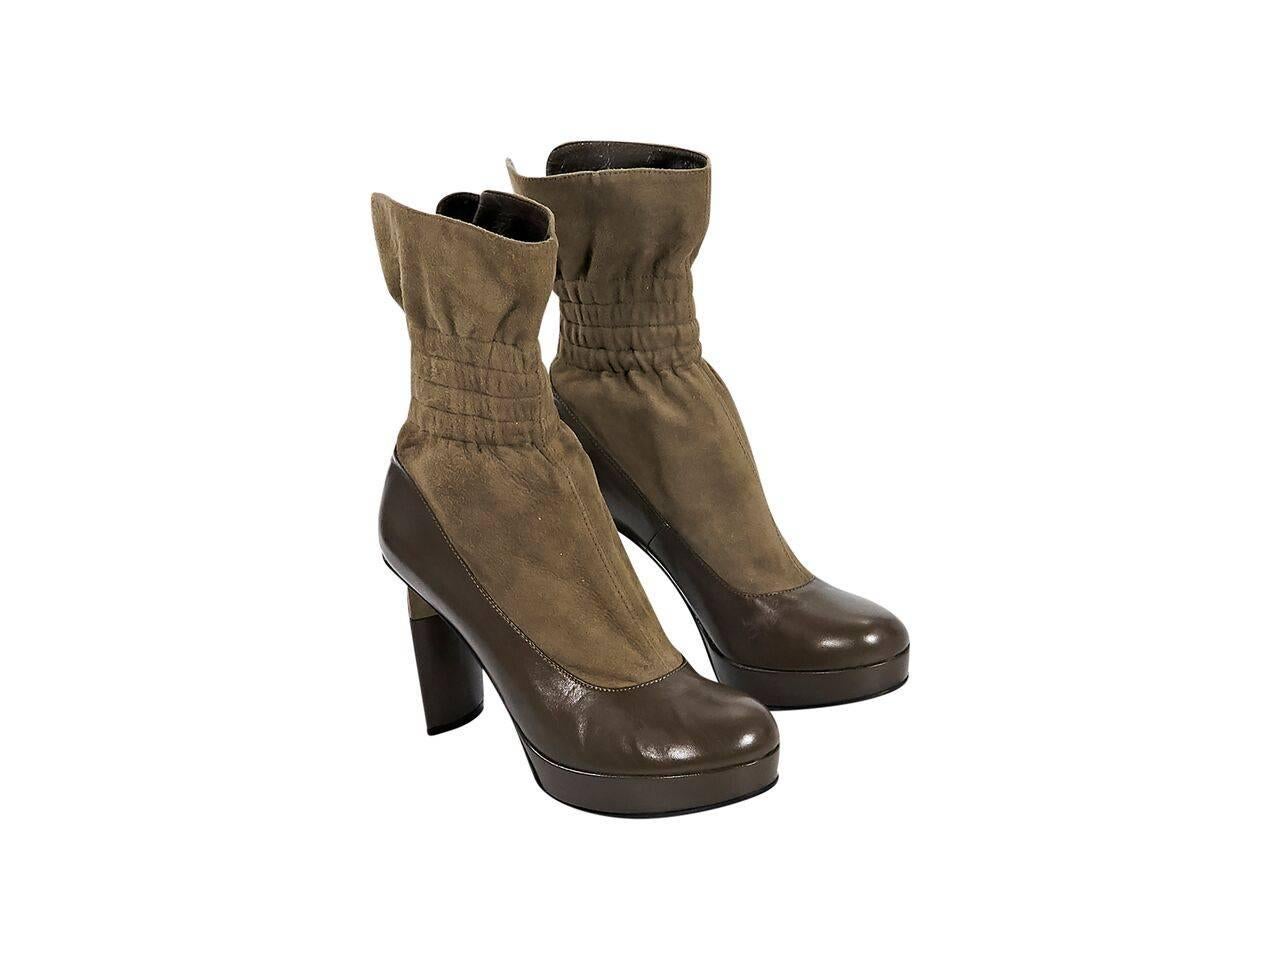 Product details:  Taupe suede and leather boots by Fendi.  Elasticized ankle cuff.  Round toe.  Triangular block heel.  Back zip closure.  
Condition: Pre-owned. Very good.
Est. Retail $ 1,000.00